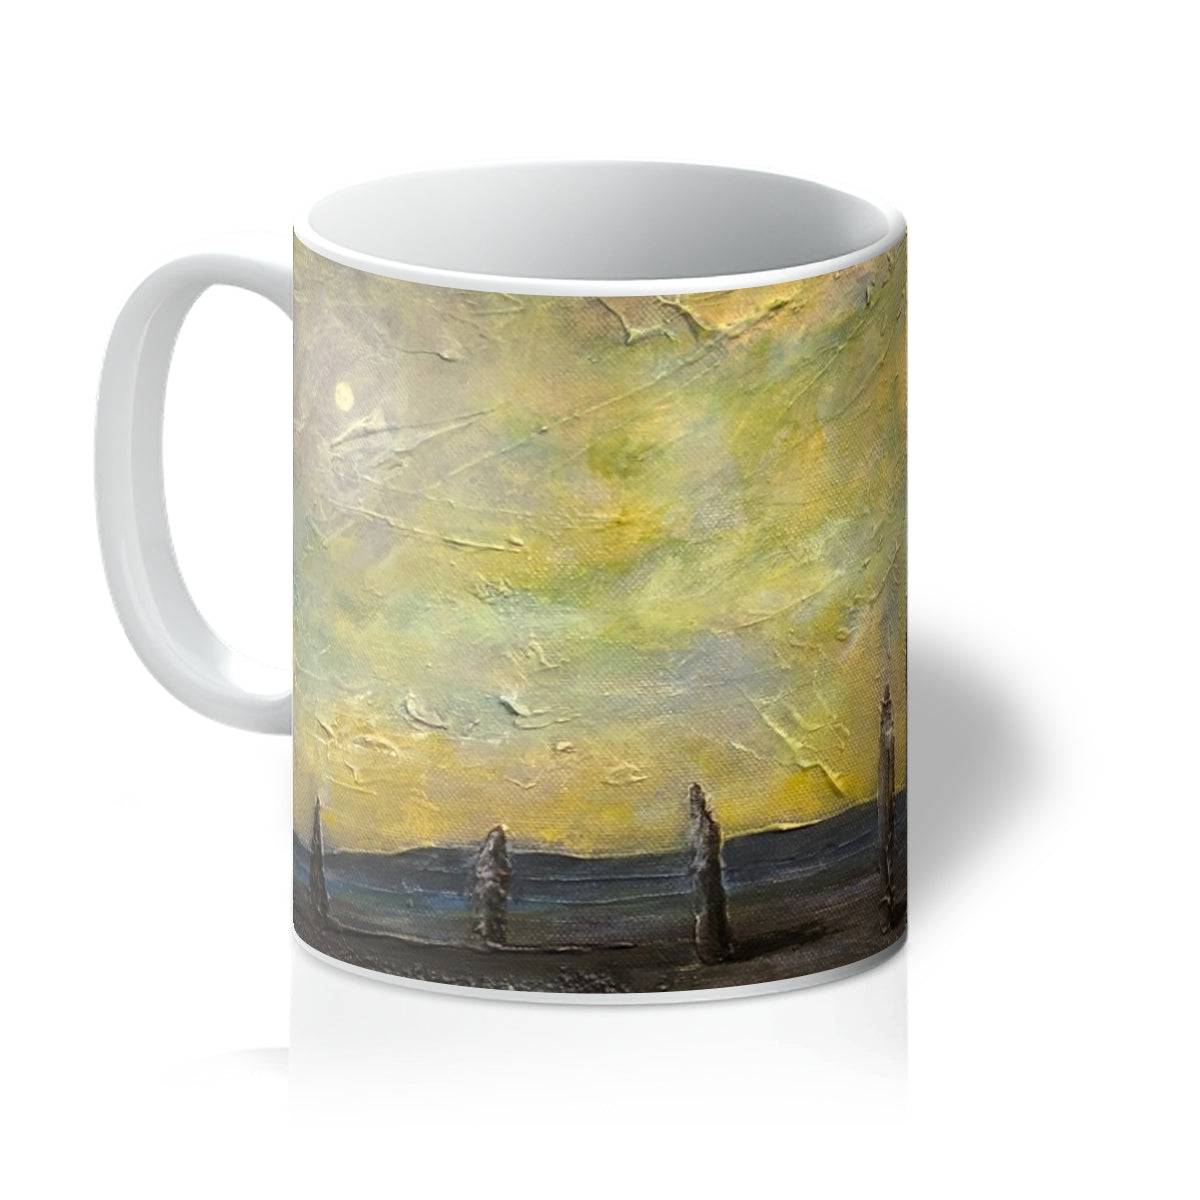 An Ethereal Ring Of Brodgar Art Gifts Mug-Mugs-Orkney Art Gallery-11oz-White-Paintings, Prints, Homeware, Art Gifts From Scotland By Scottish Artist Kevin Hunter